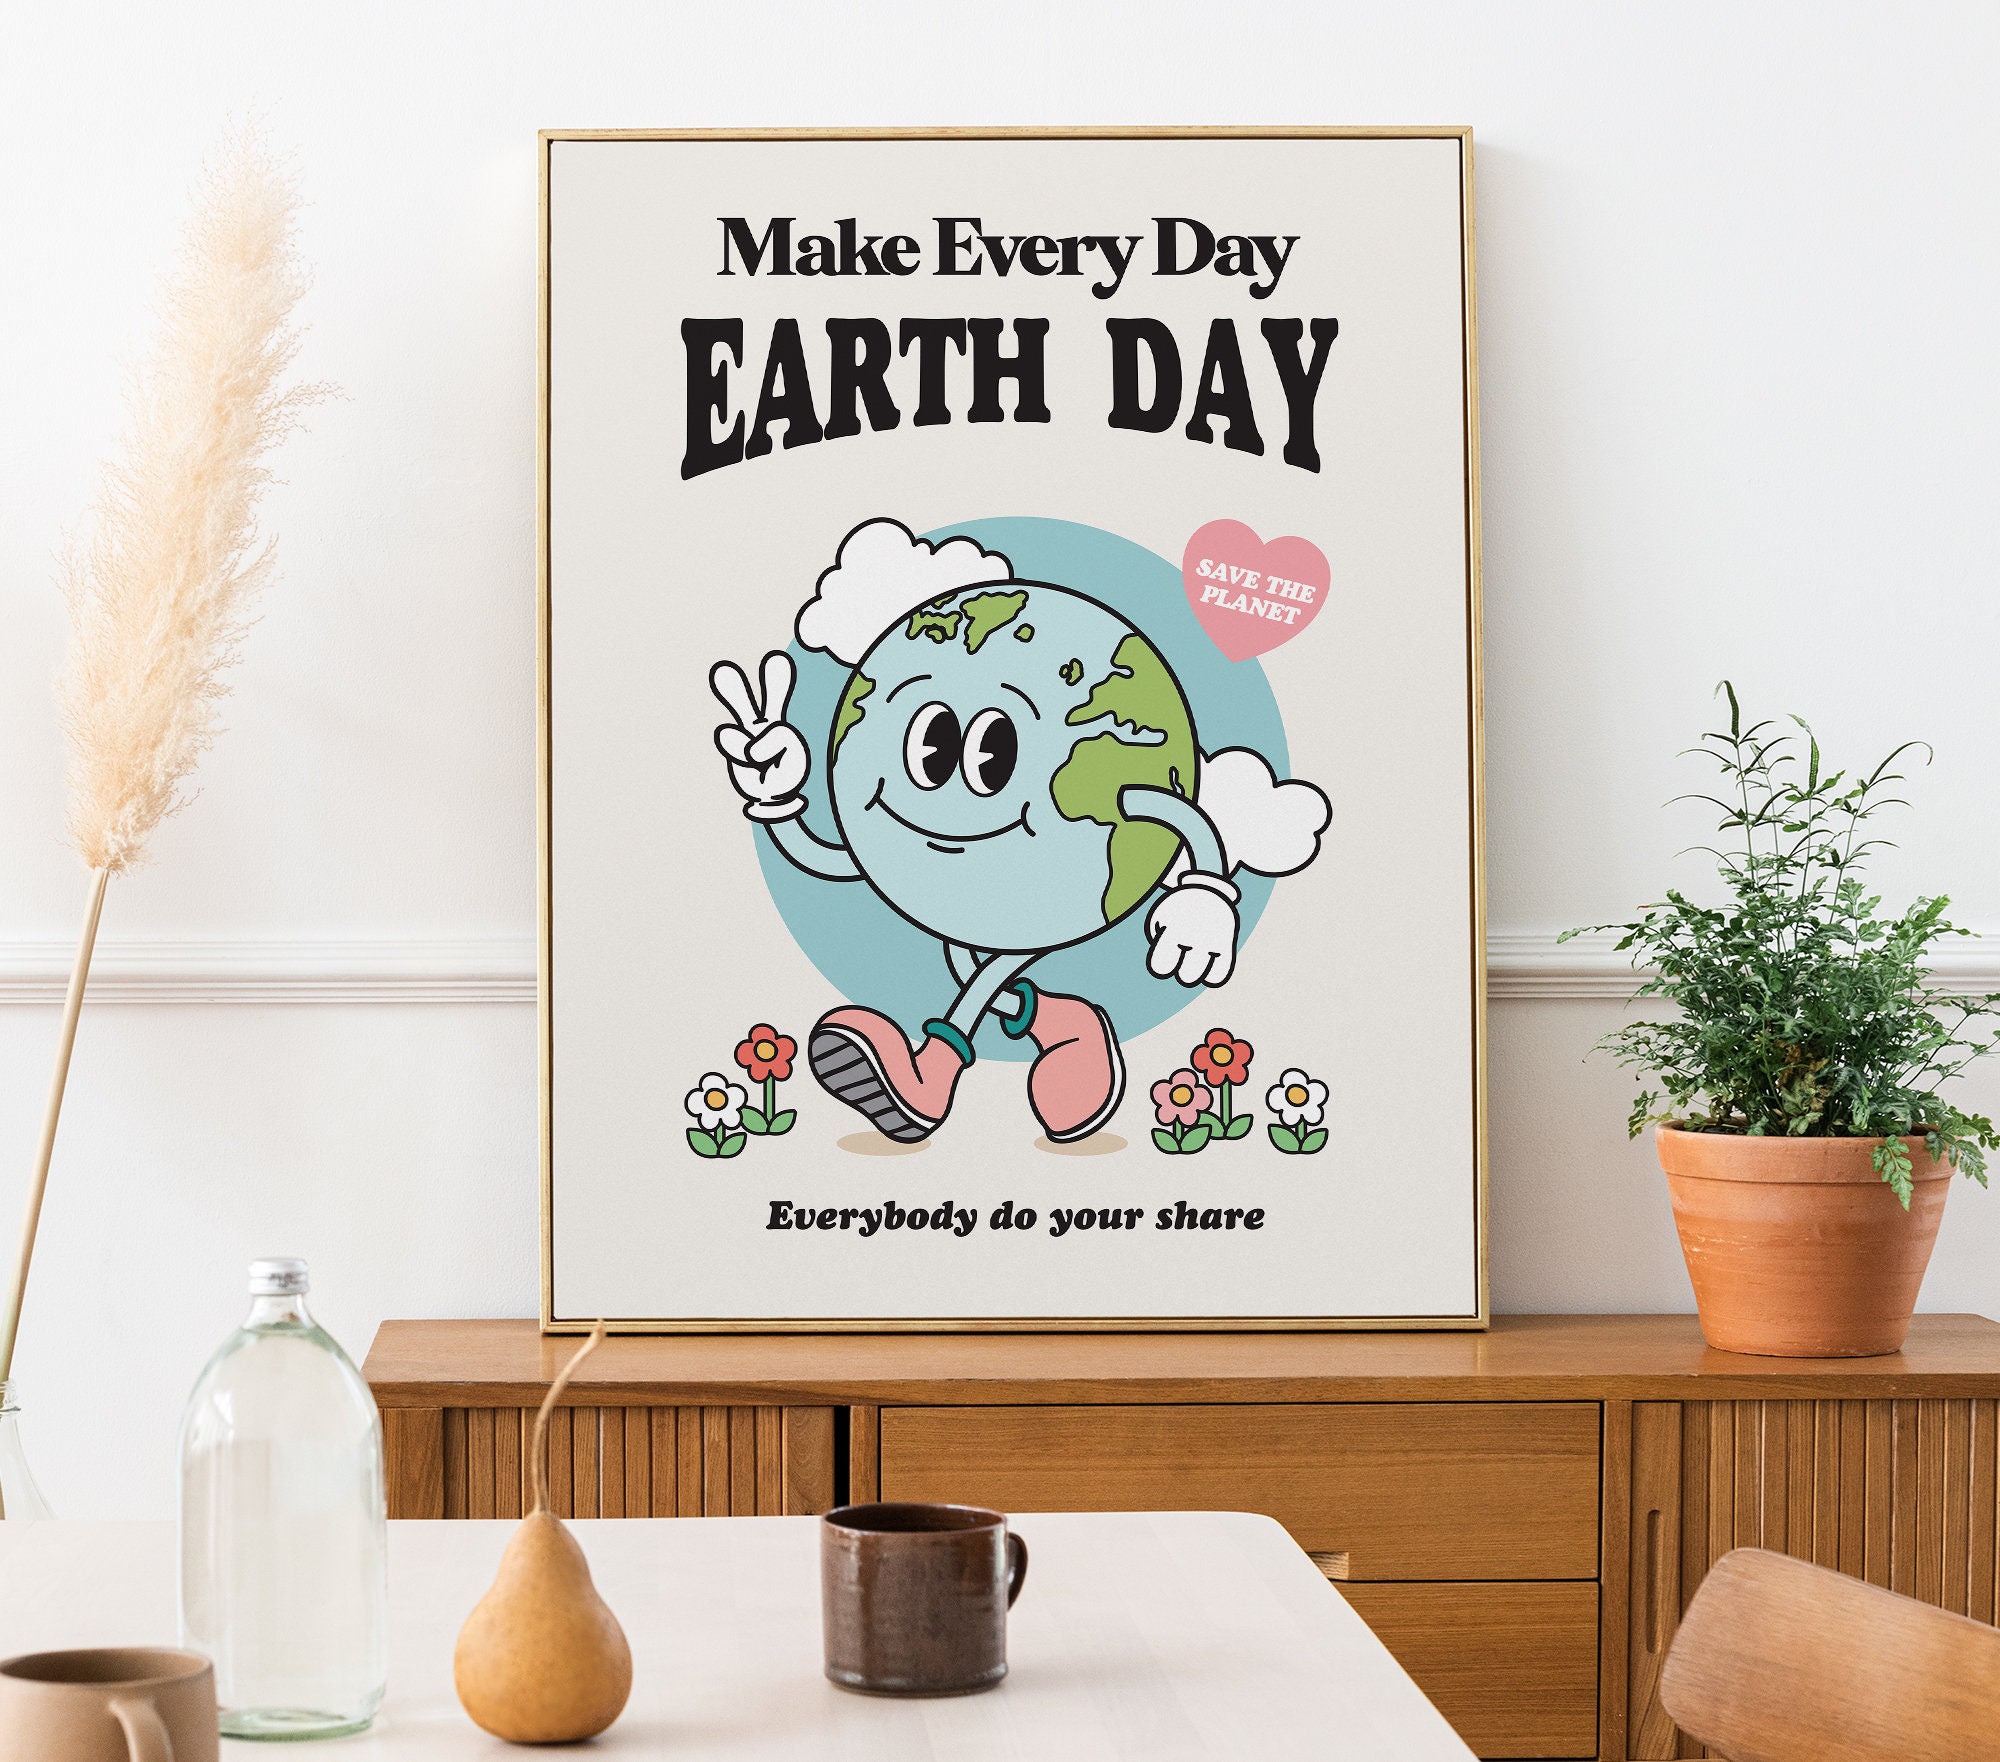 salad Forbid cable Posters Save Earth - Etsy